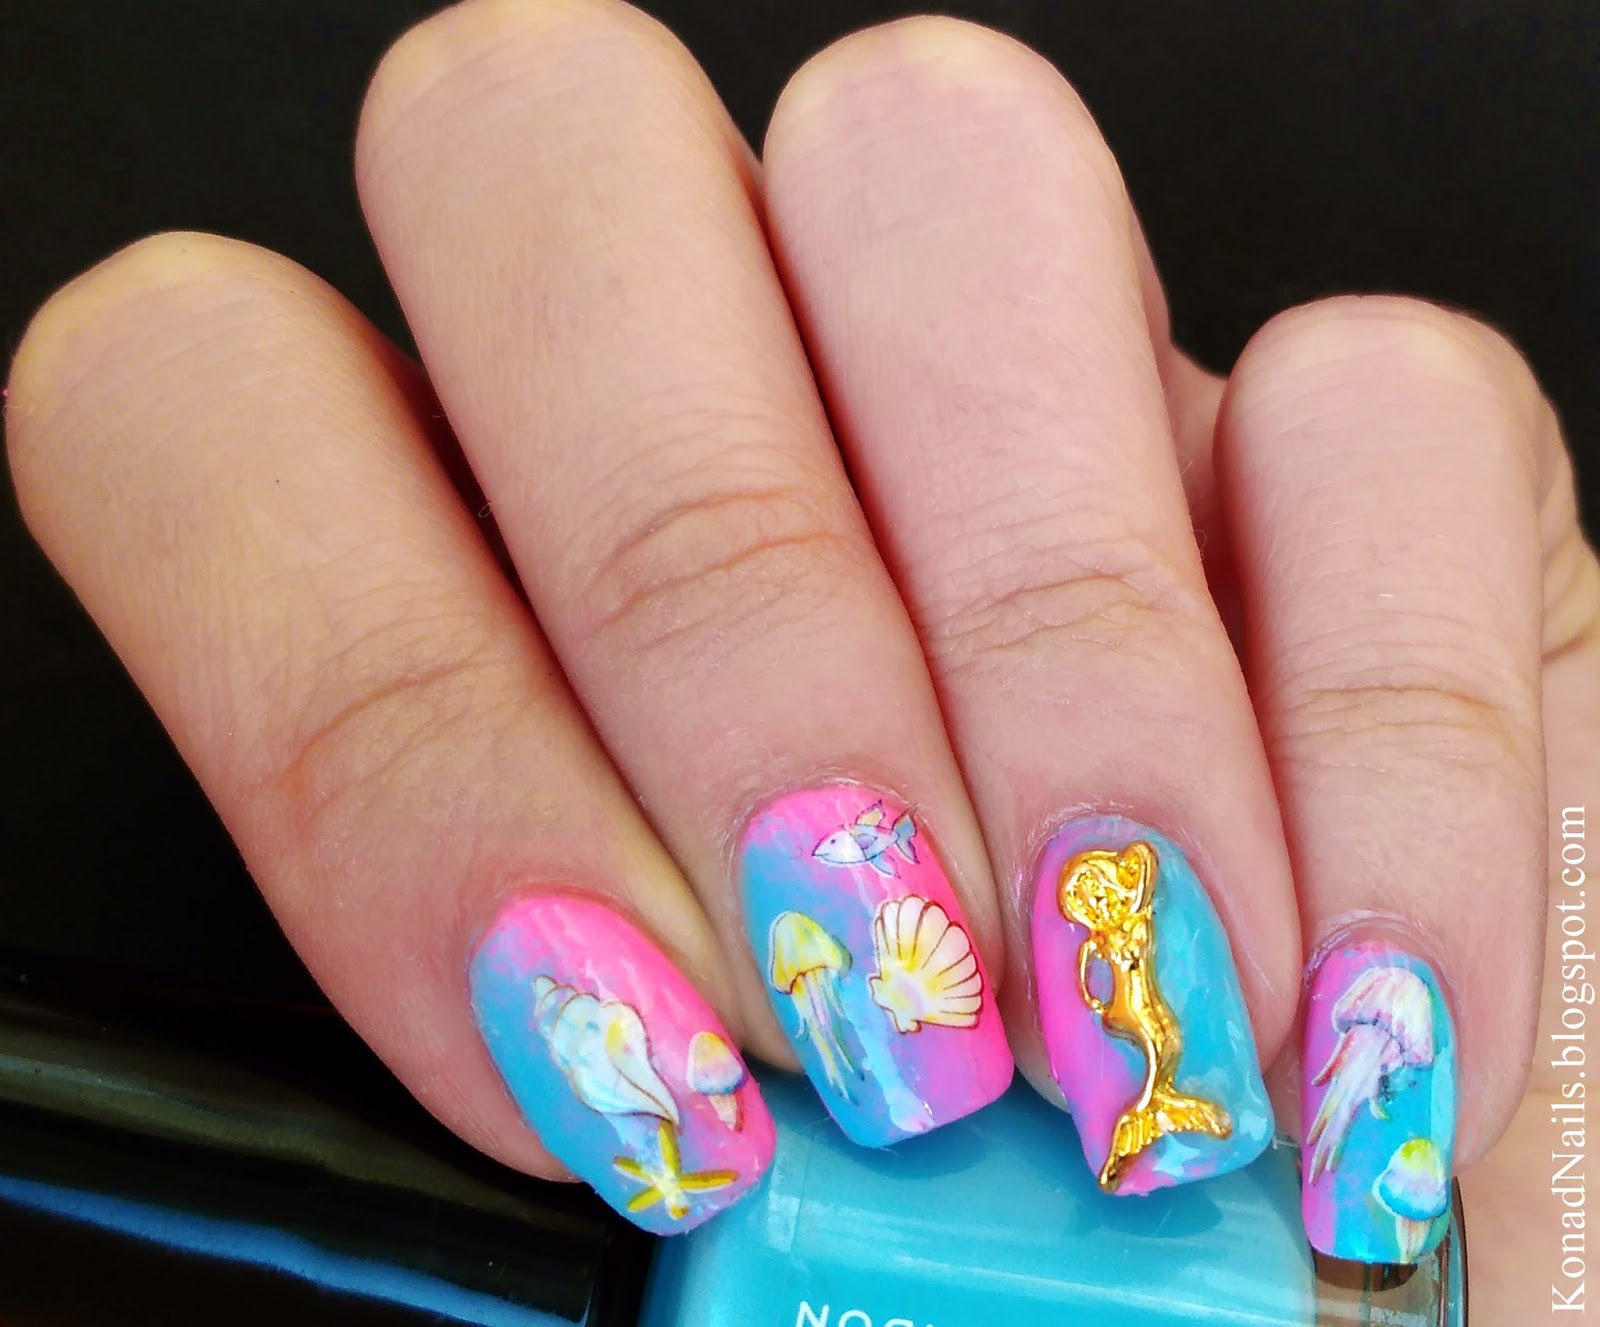 5. Under the sea nail art for a whimsical touch - wide 1